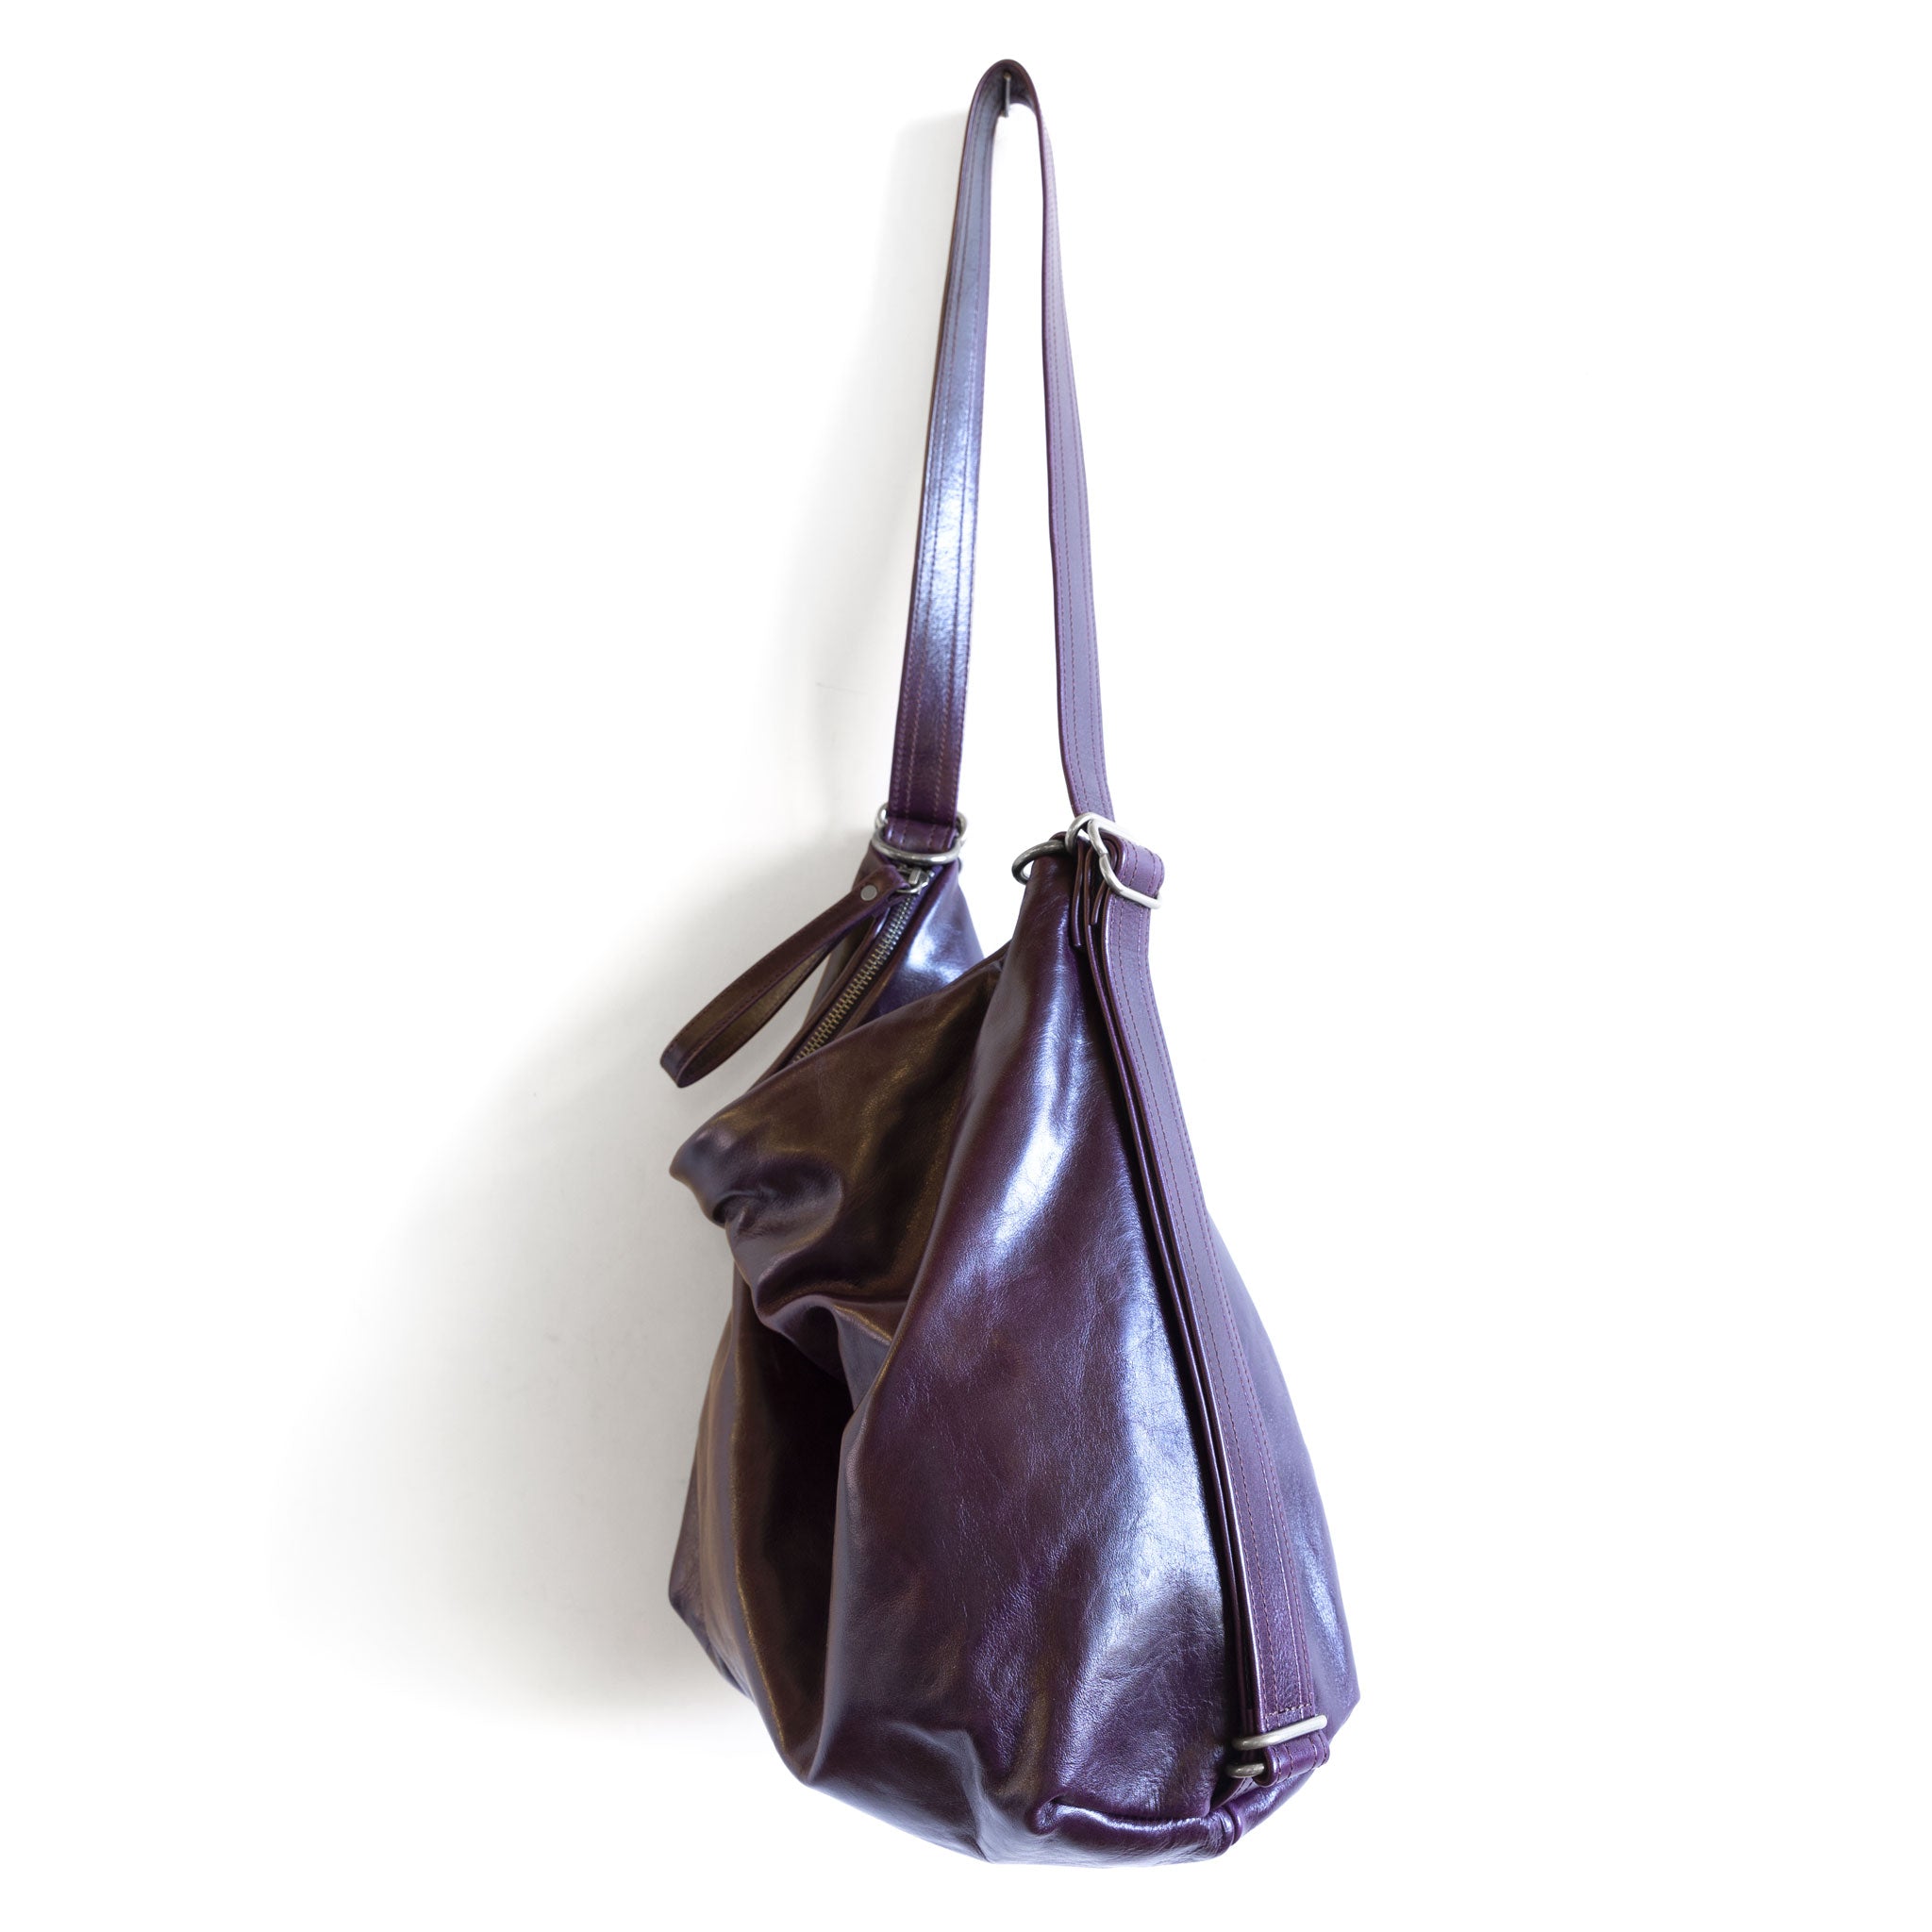 hobo pack original, size large shown, in aubergine showing low-profile strap detail